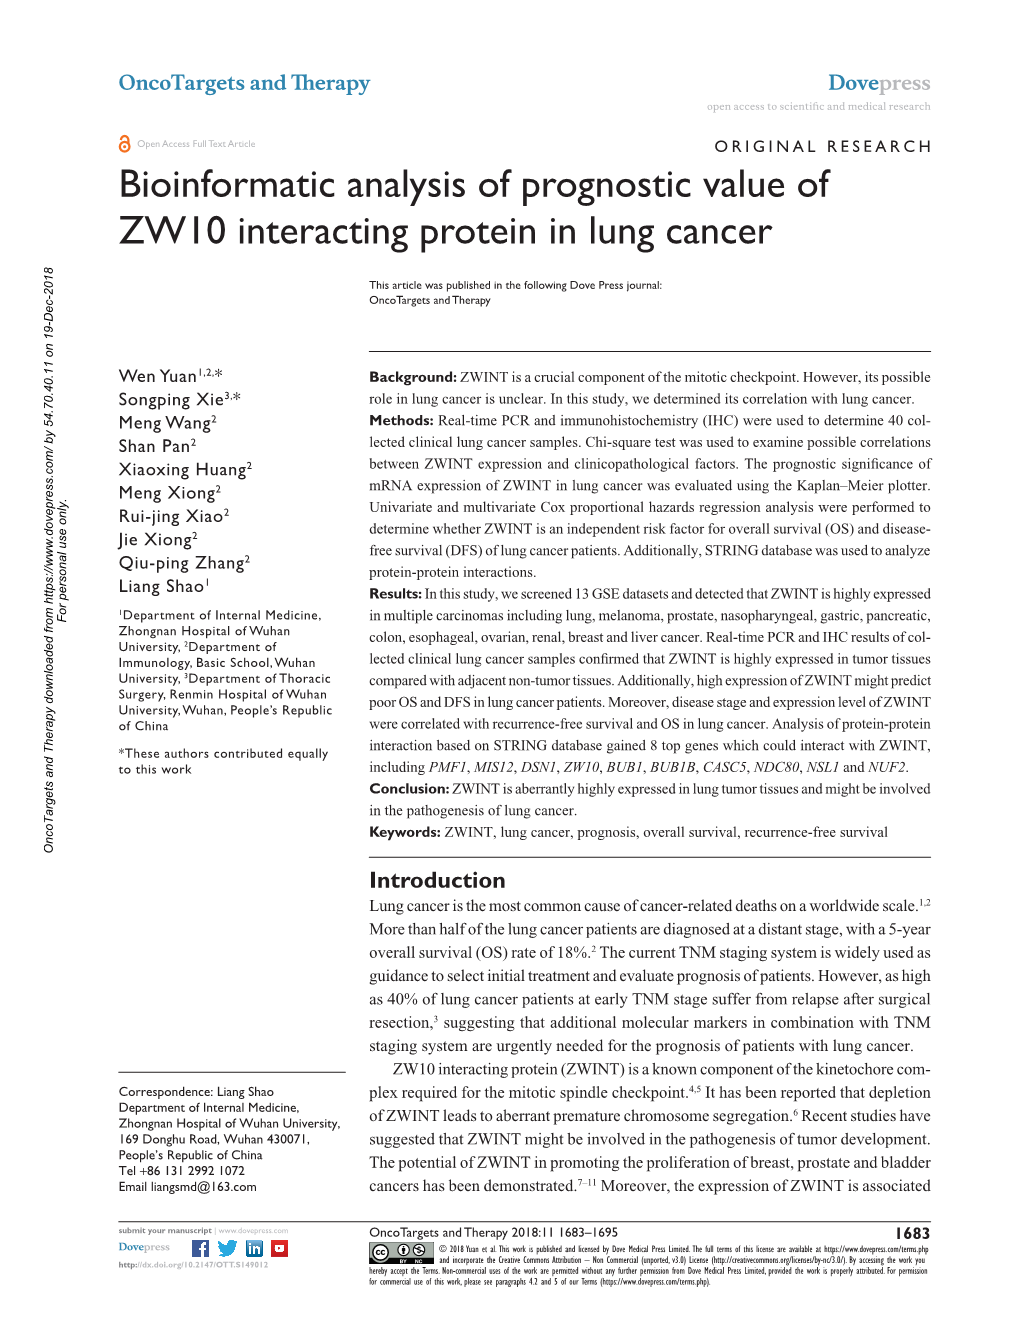 Bioinformatic Analysis of Prognostic Value of ZW10 Interacting Protein in Lung Cancer